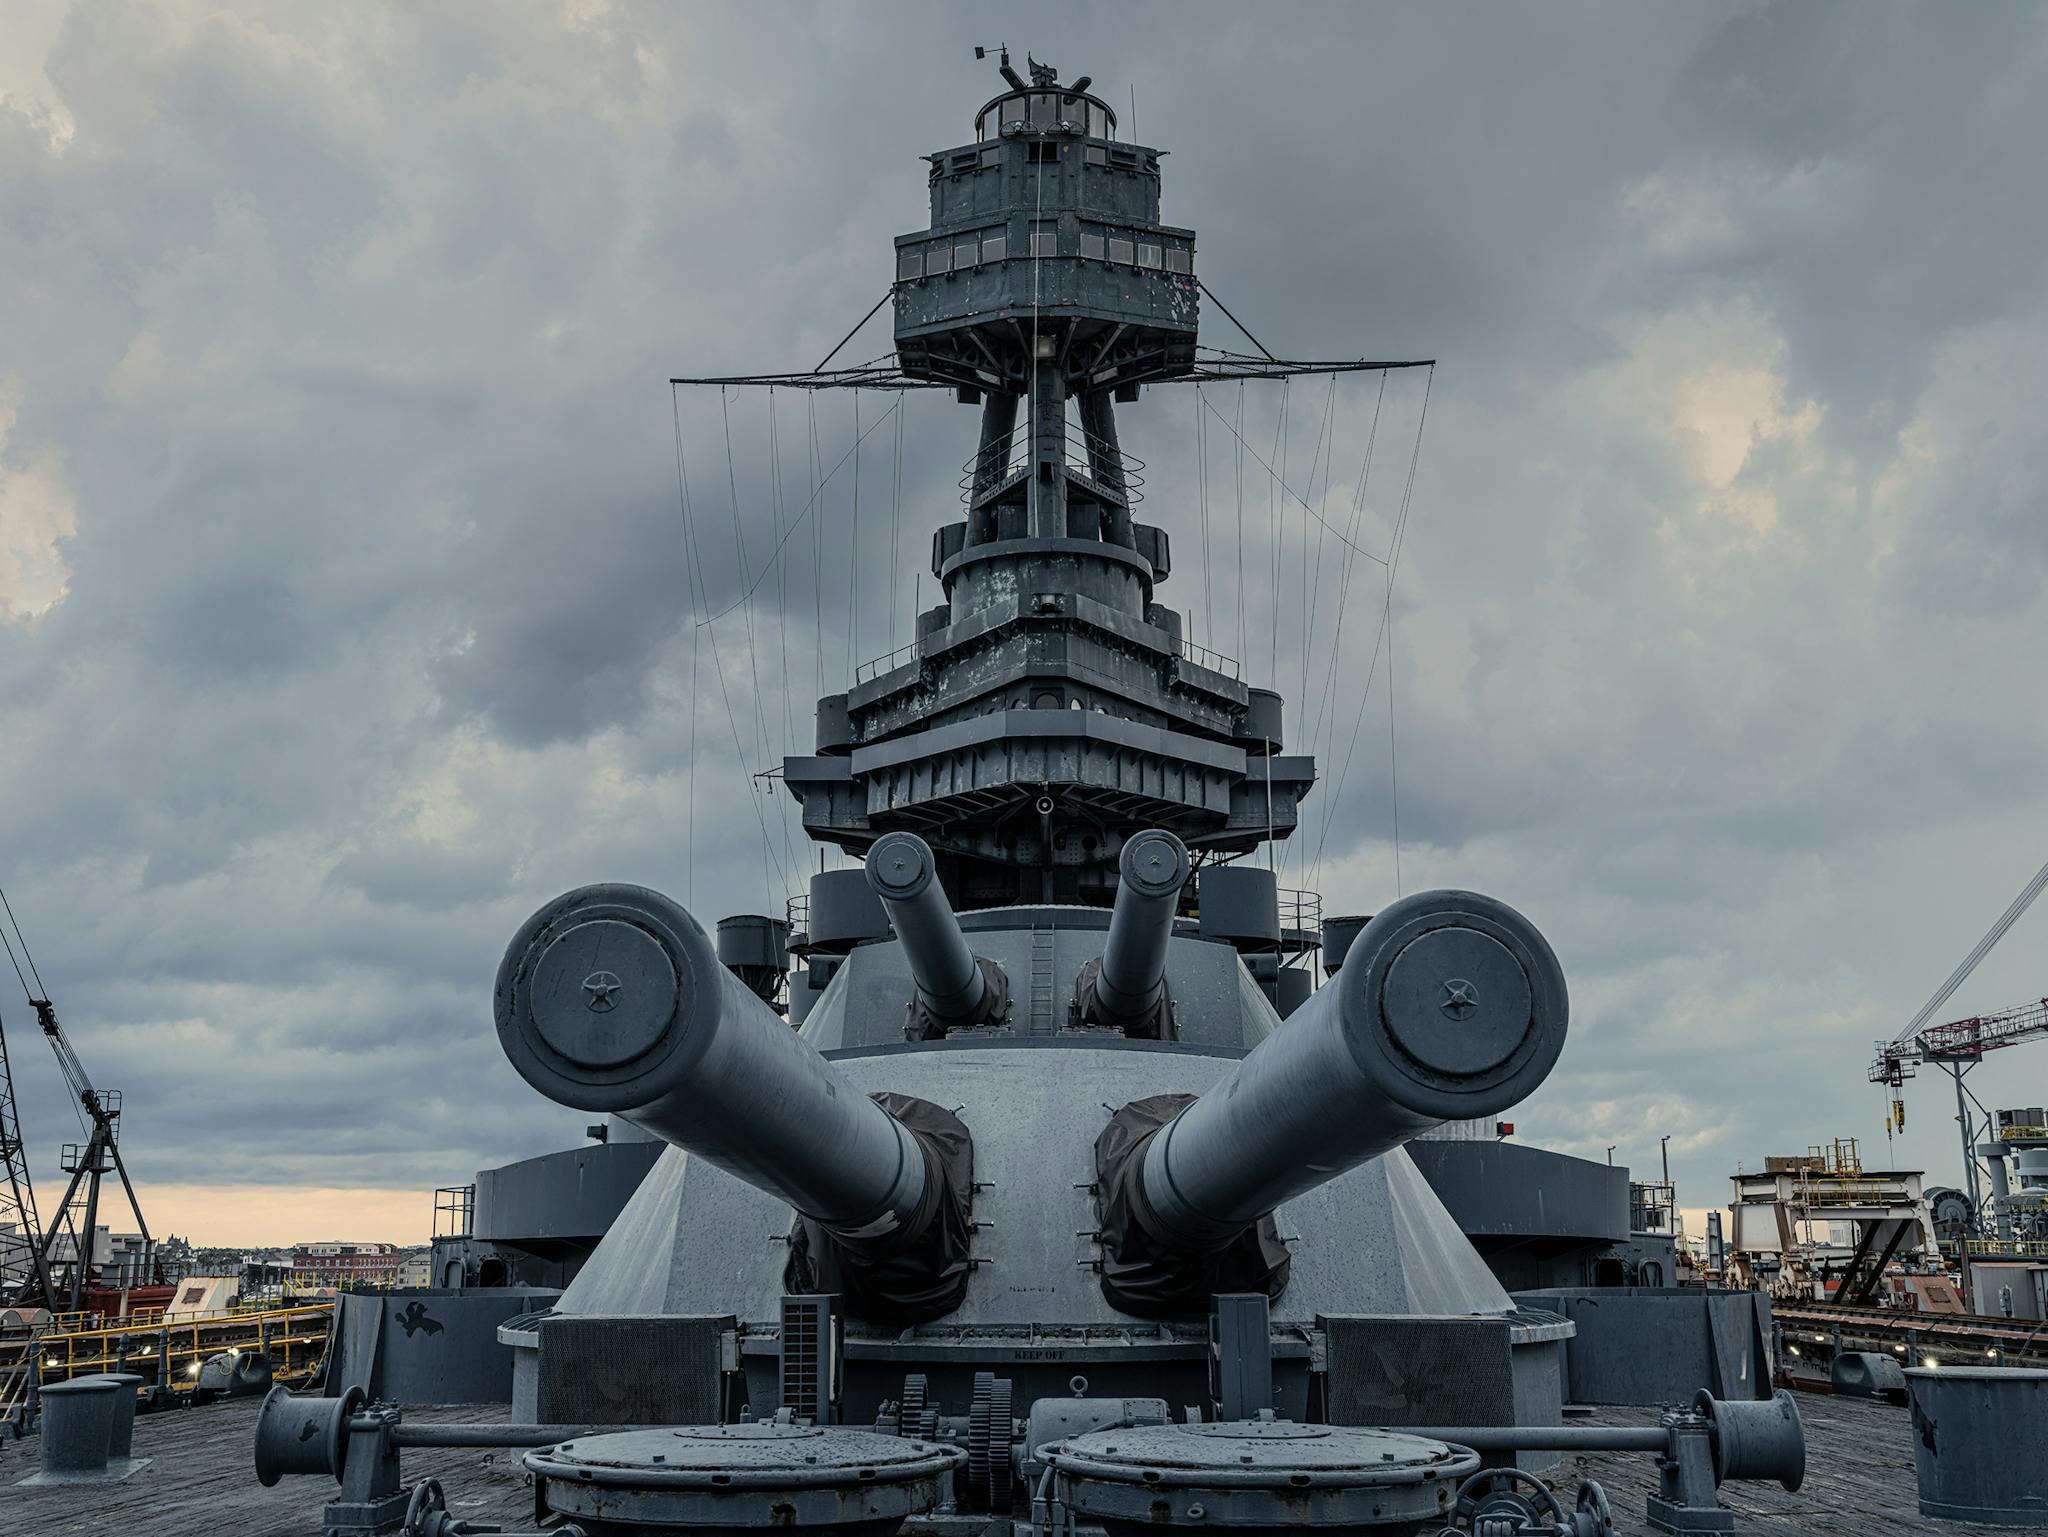 Four of the fourteen-inch guns, whose 1,400-pound shells could travel thirteen miles. The men who aimed and directed the fire were in the foretop, at the top of the photo. During a battle there would be some twenty sailors manning the operation of these massive weapons.